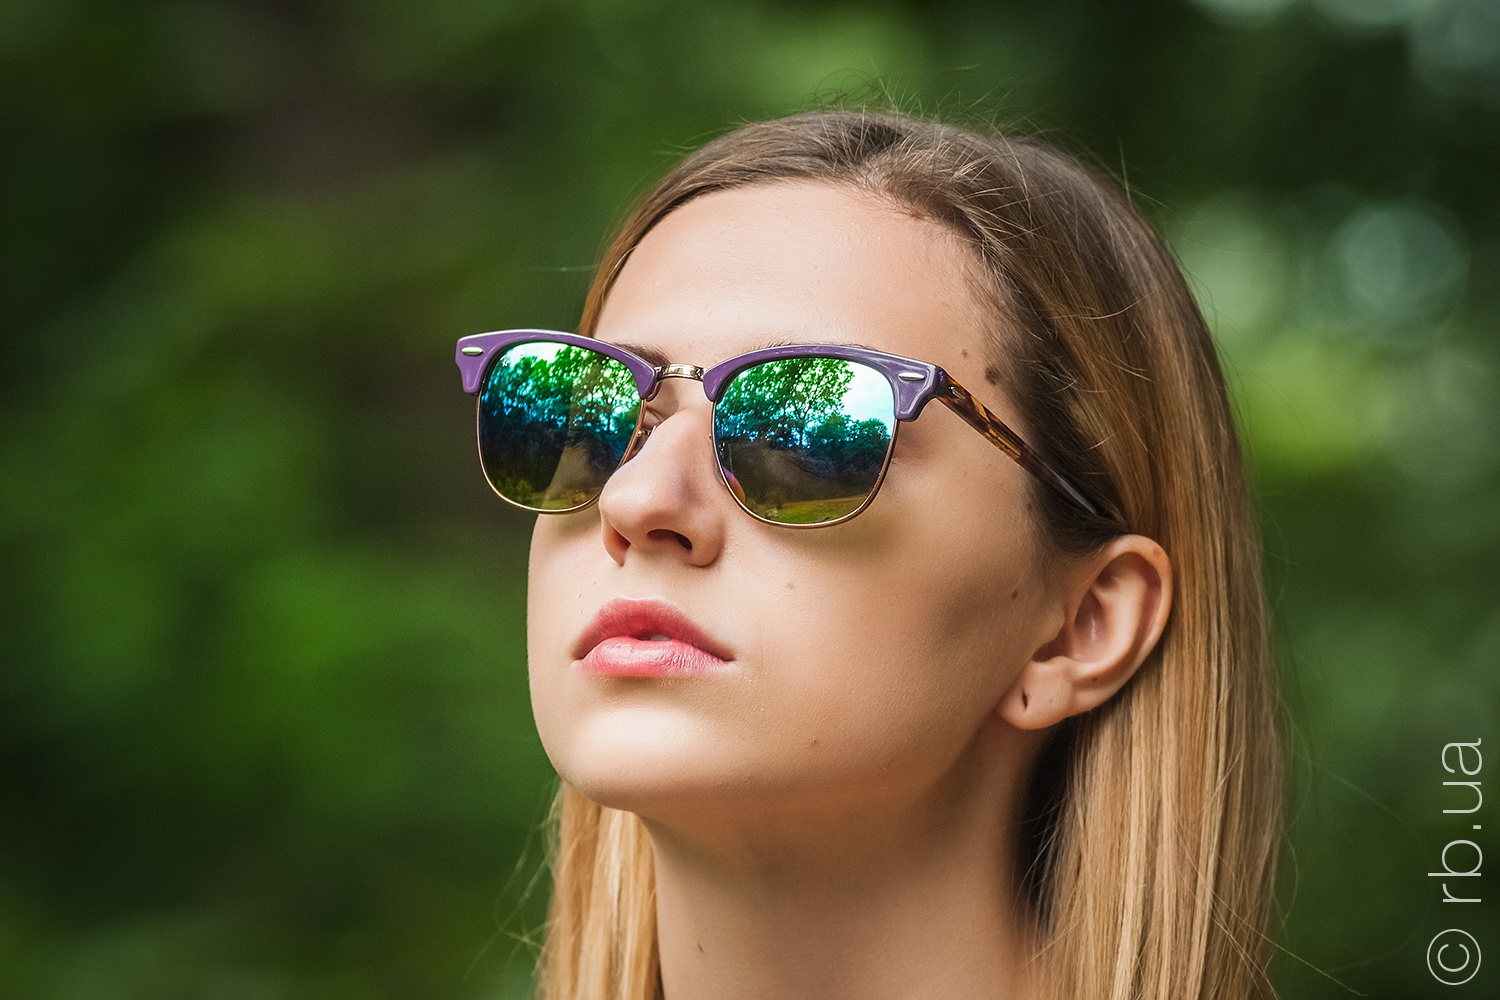 Are You Searching For a Timeless Square Sunglasses: 10 Stylish Ray-Ban Options